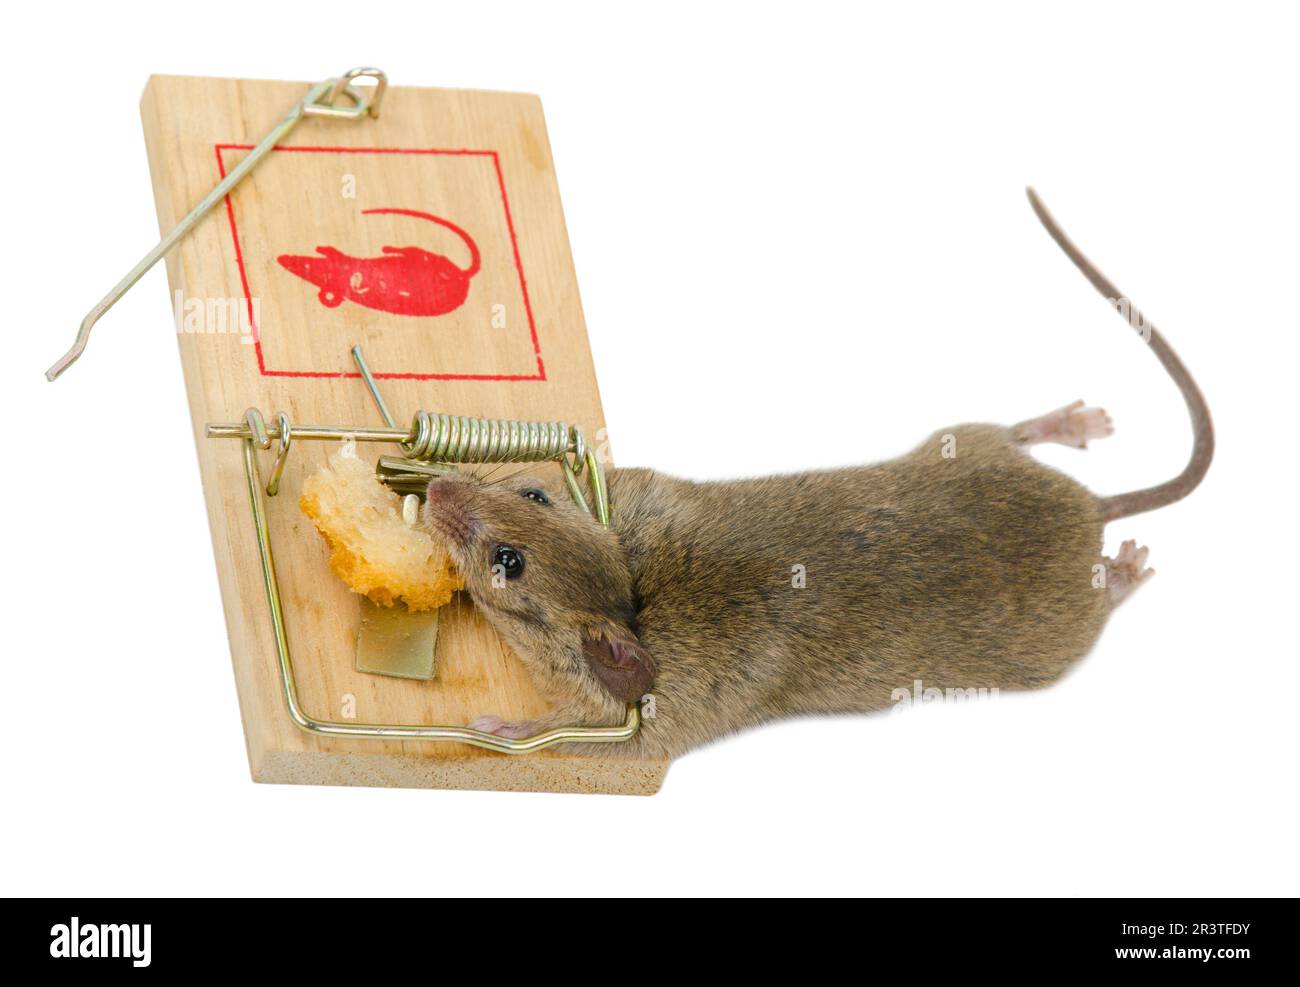 https://c8.alamy.com/comp/2R3TFDY/the-mouse-in-a-mousetrap-2R3TFDY.jpg